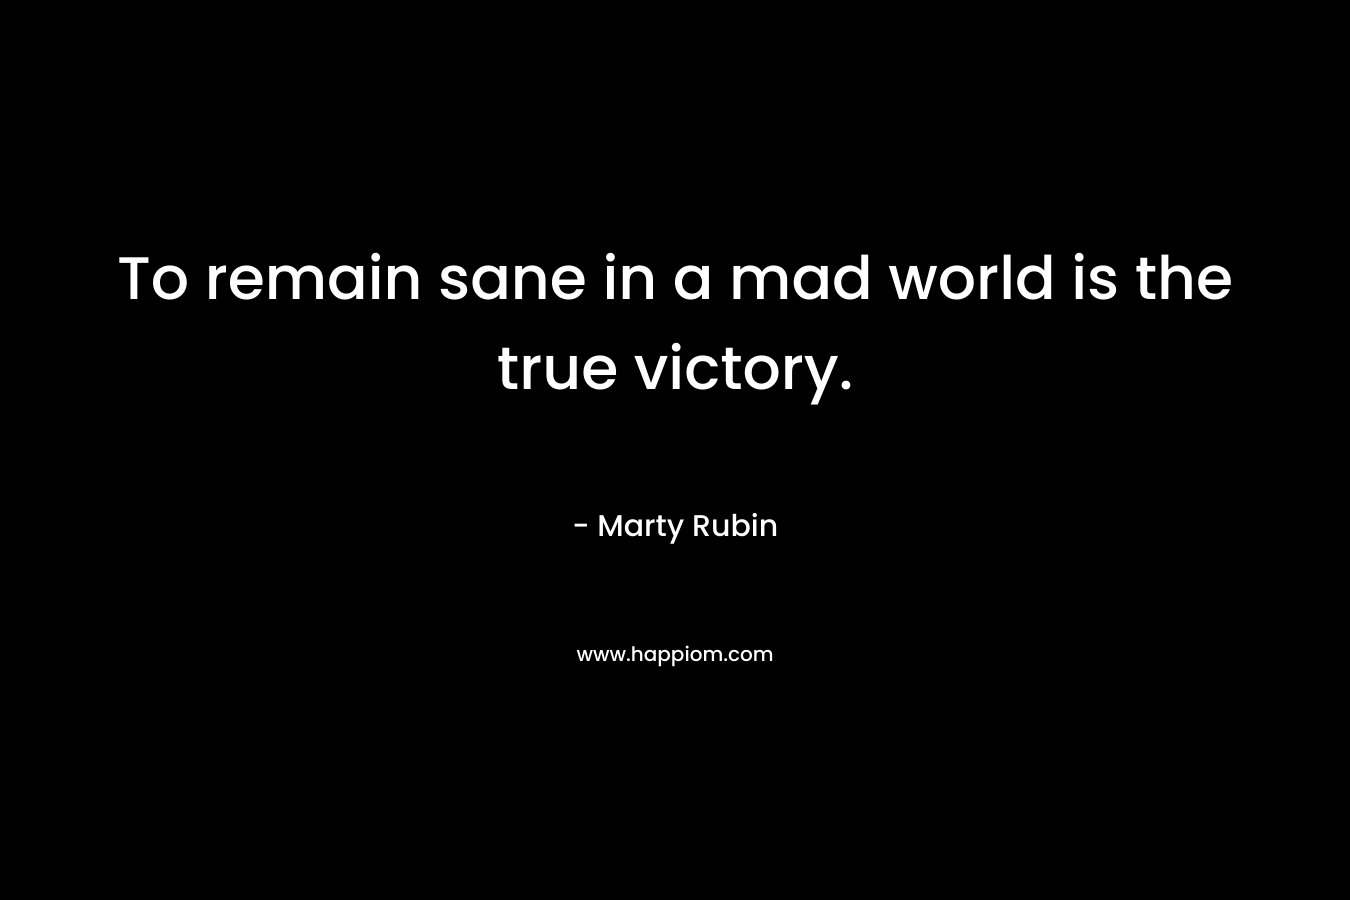 To remain sane in a mad world is the true victory.